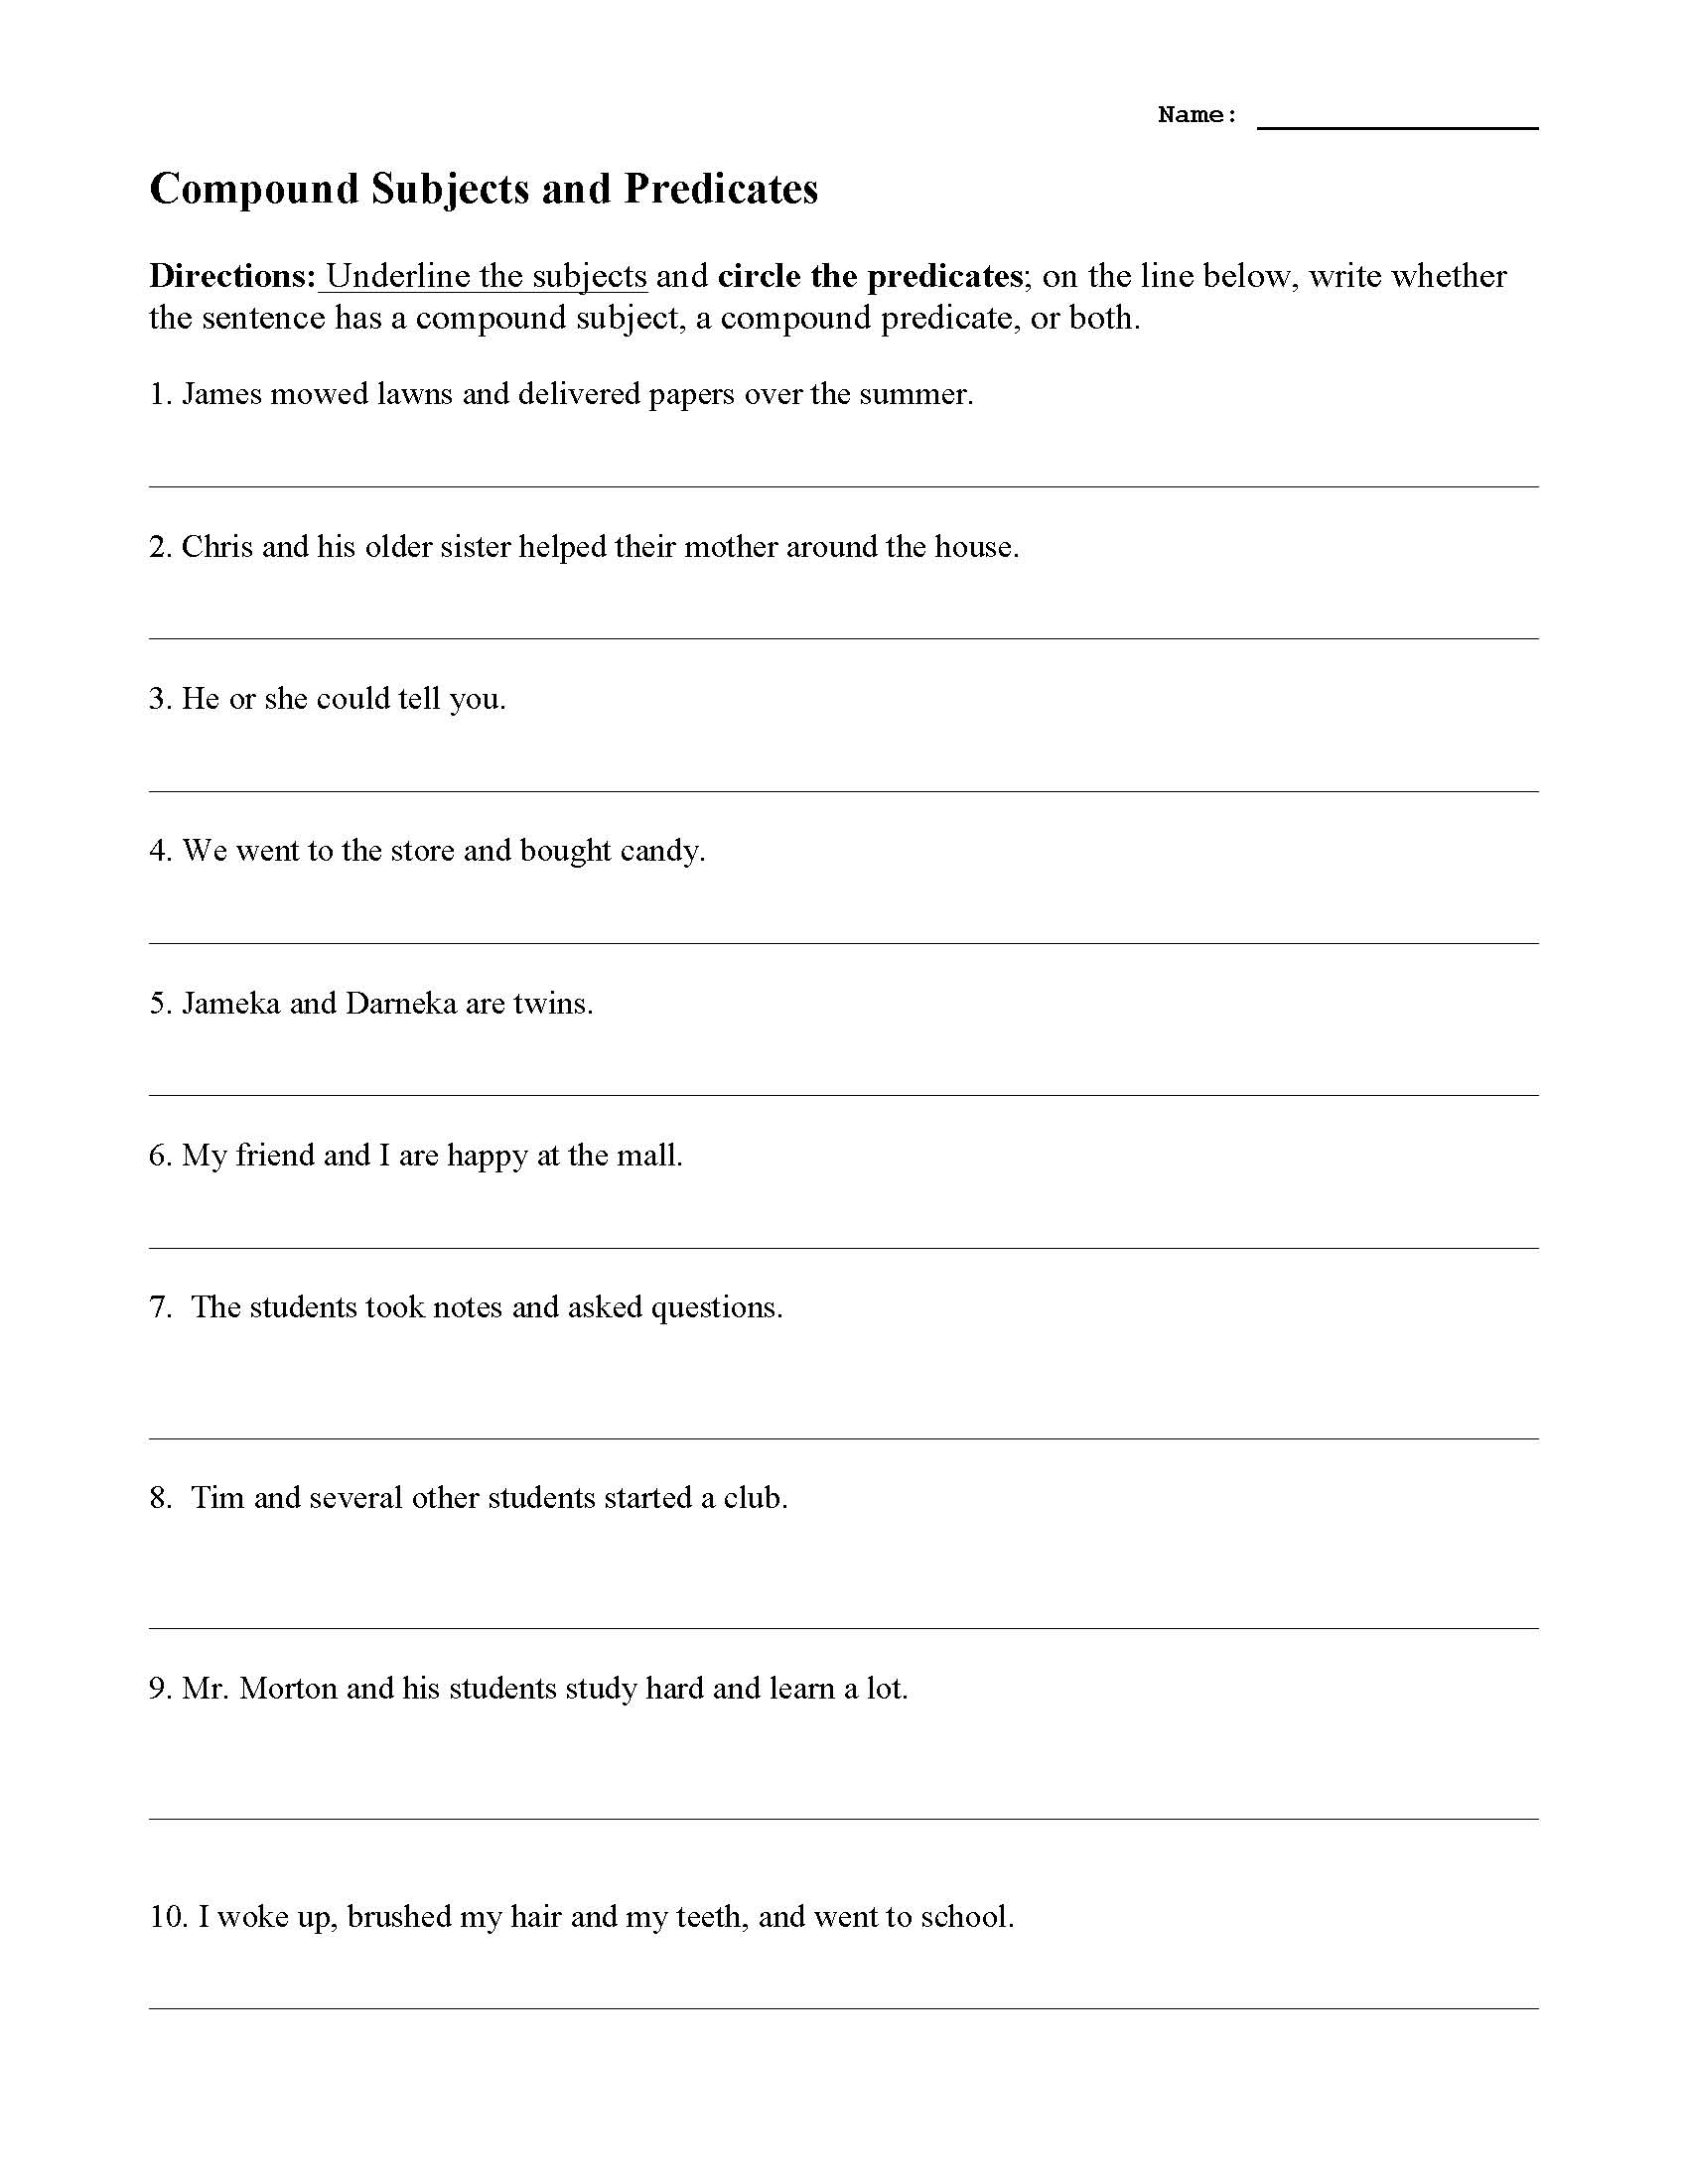 subjects-and-predicates-worksheets-k5-learning-subject-and-predicate-vocabulary-worksheet